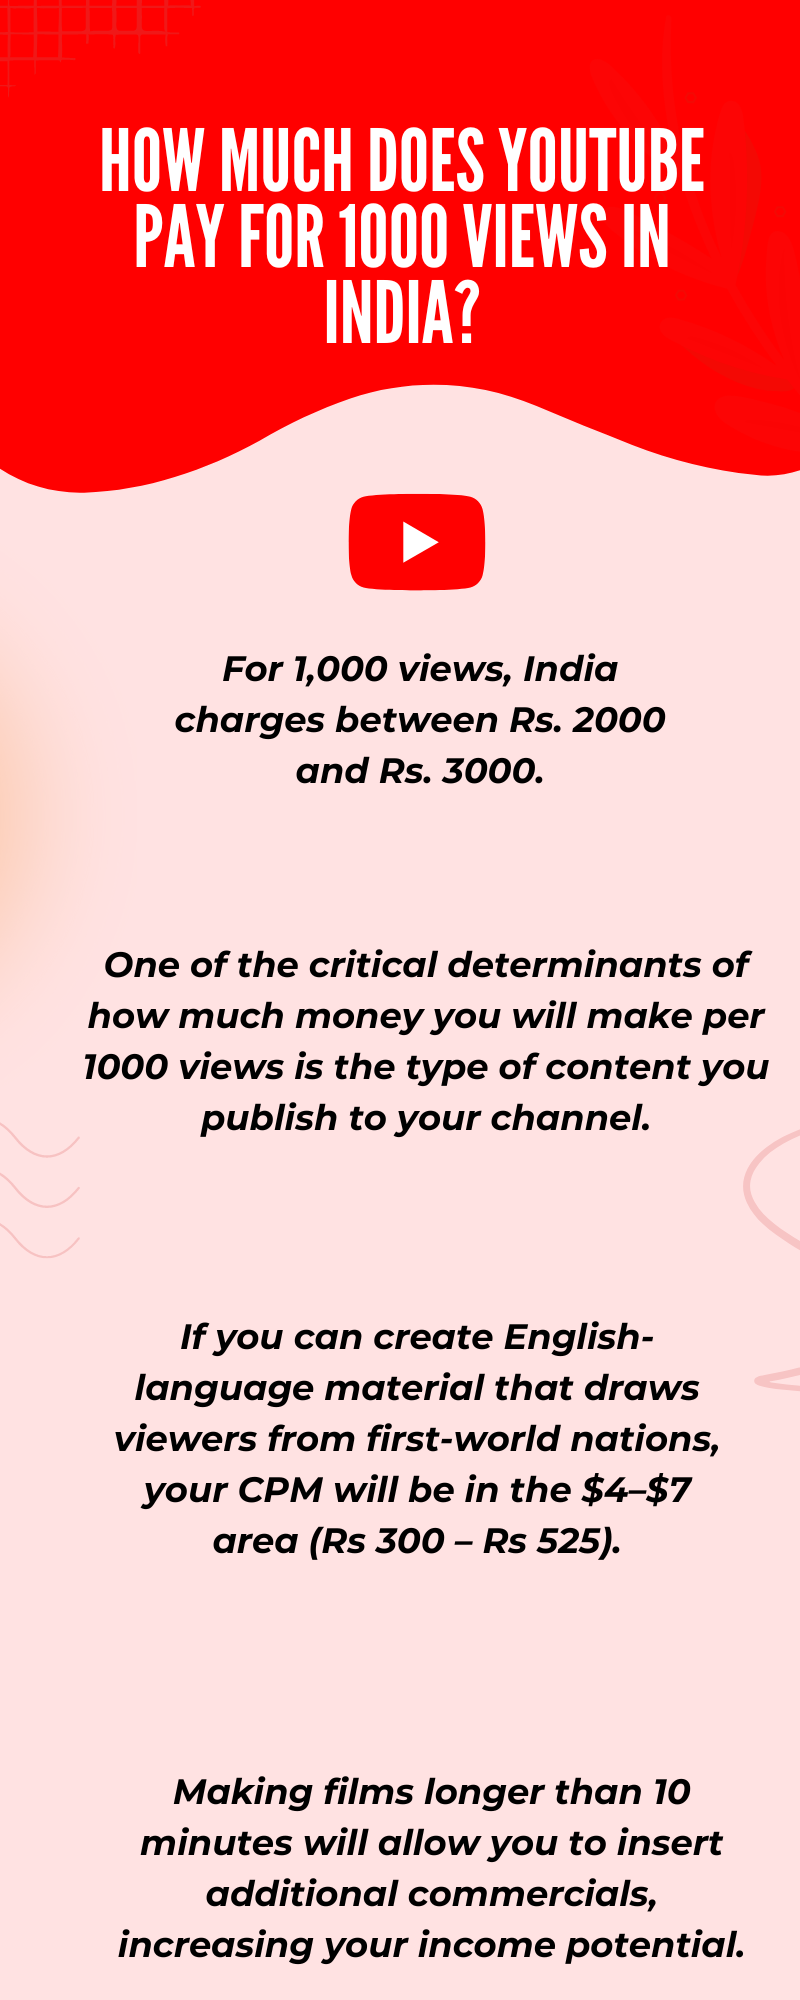 How Much Does YouTube Pay For 1000 Views In India?